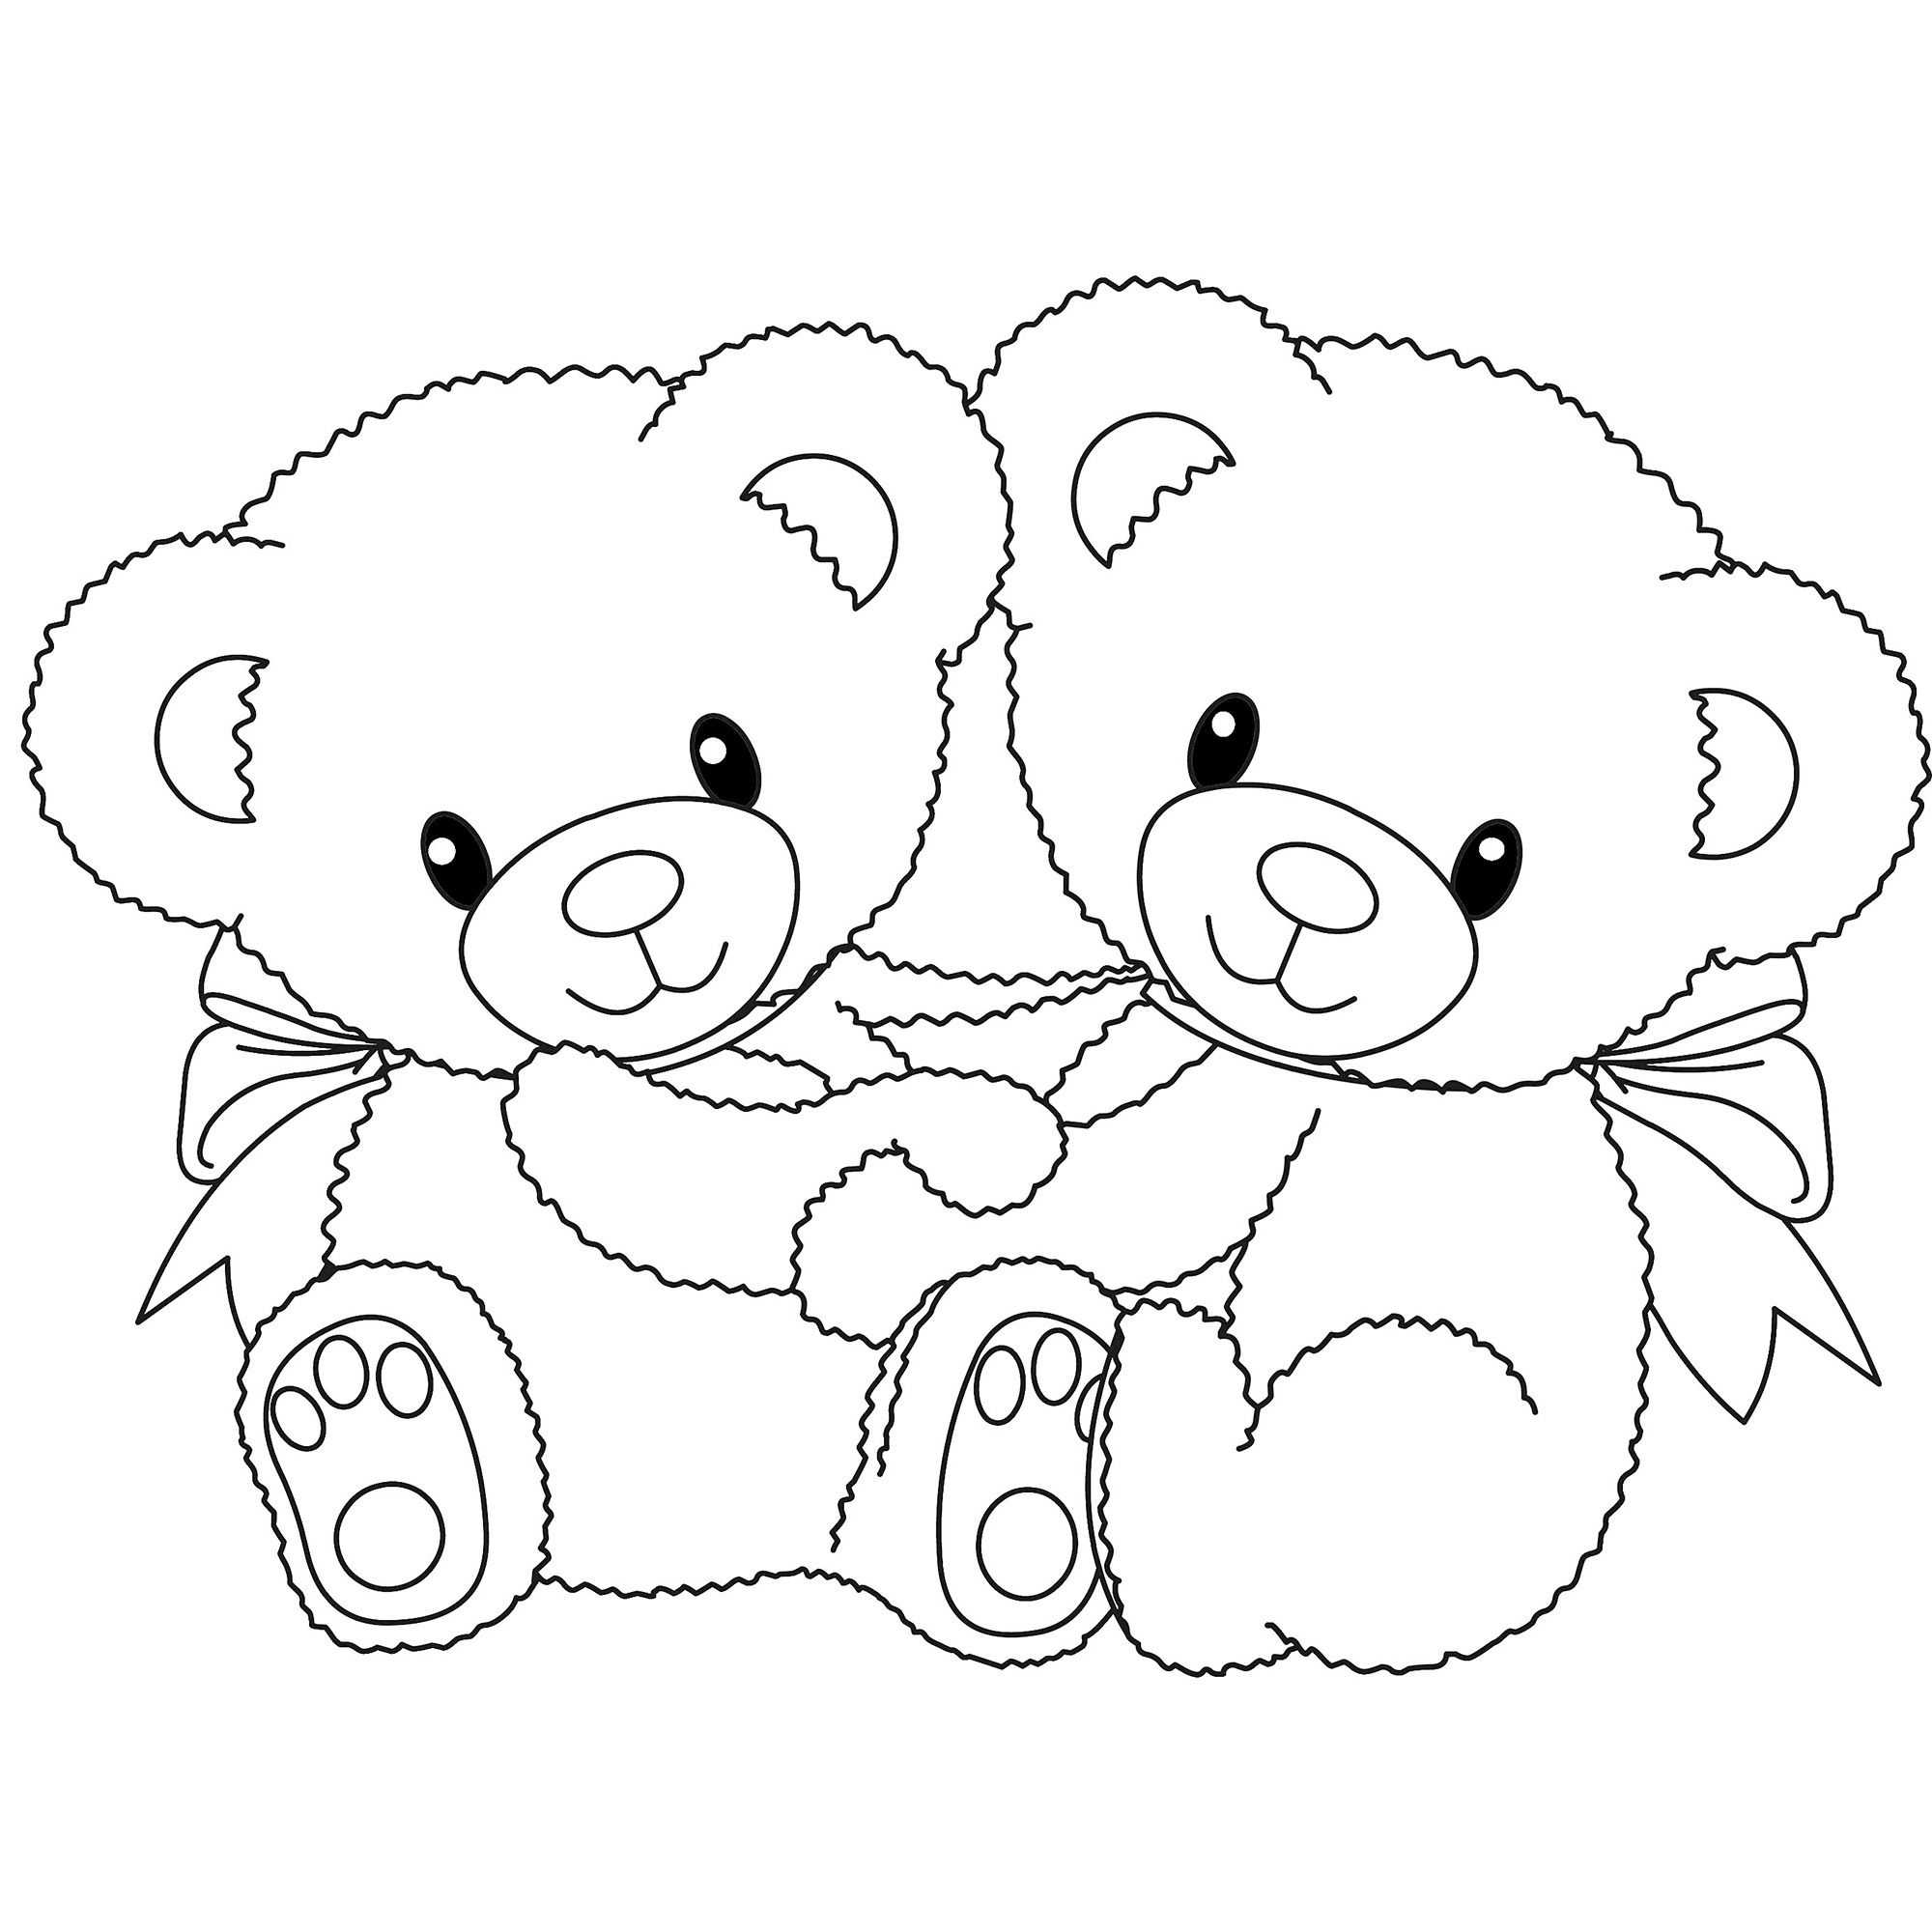 14 Teddy Bear Coloring Pages ♡♡♡ ideas | bear coloring pages, teddy bear  coloring pages, coloring pages